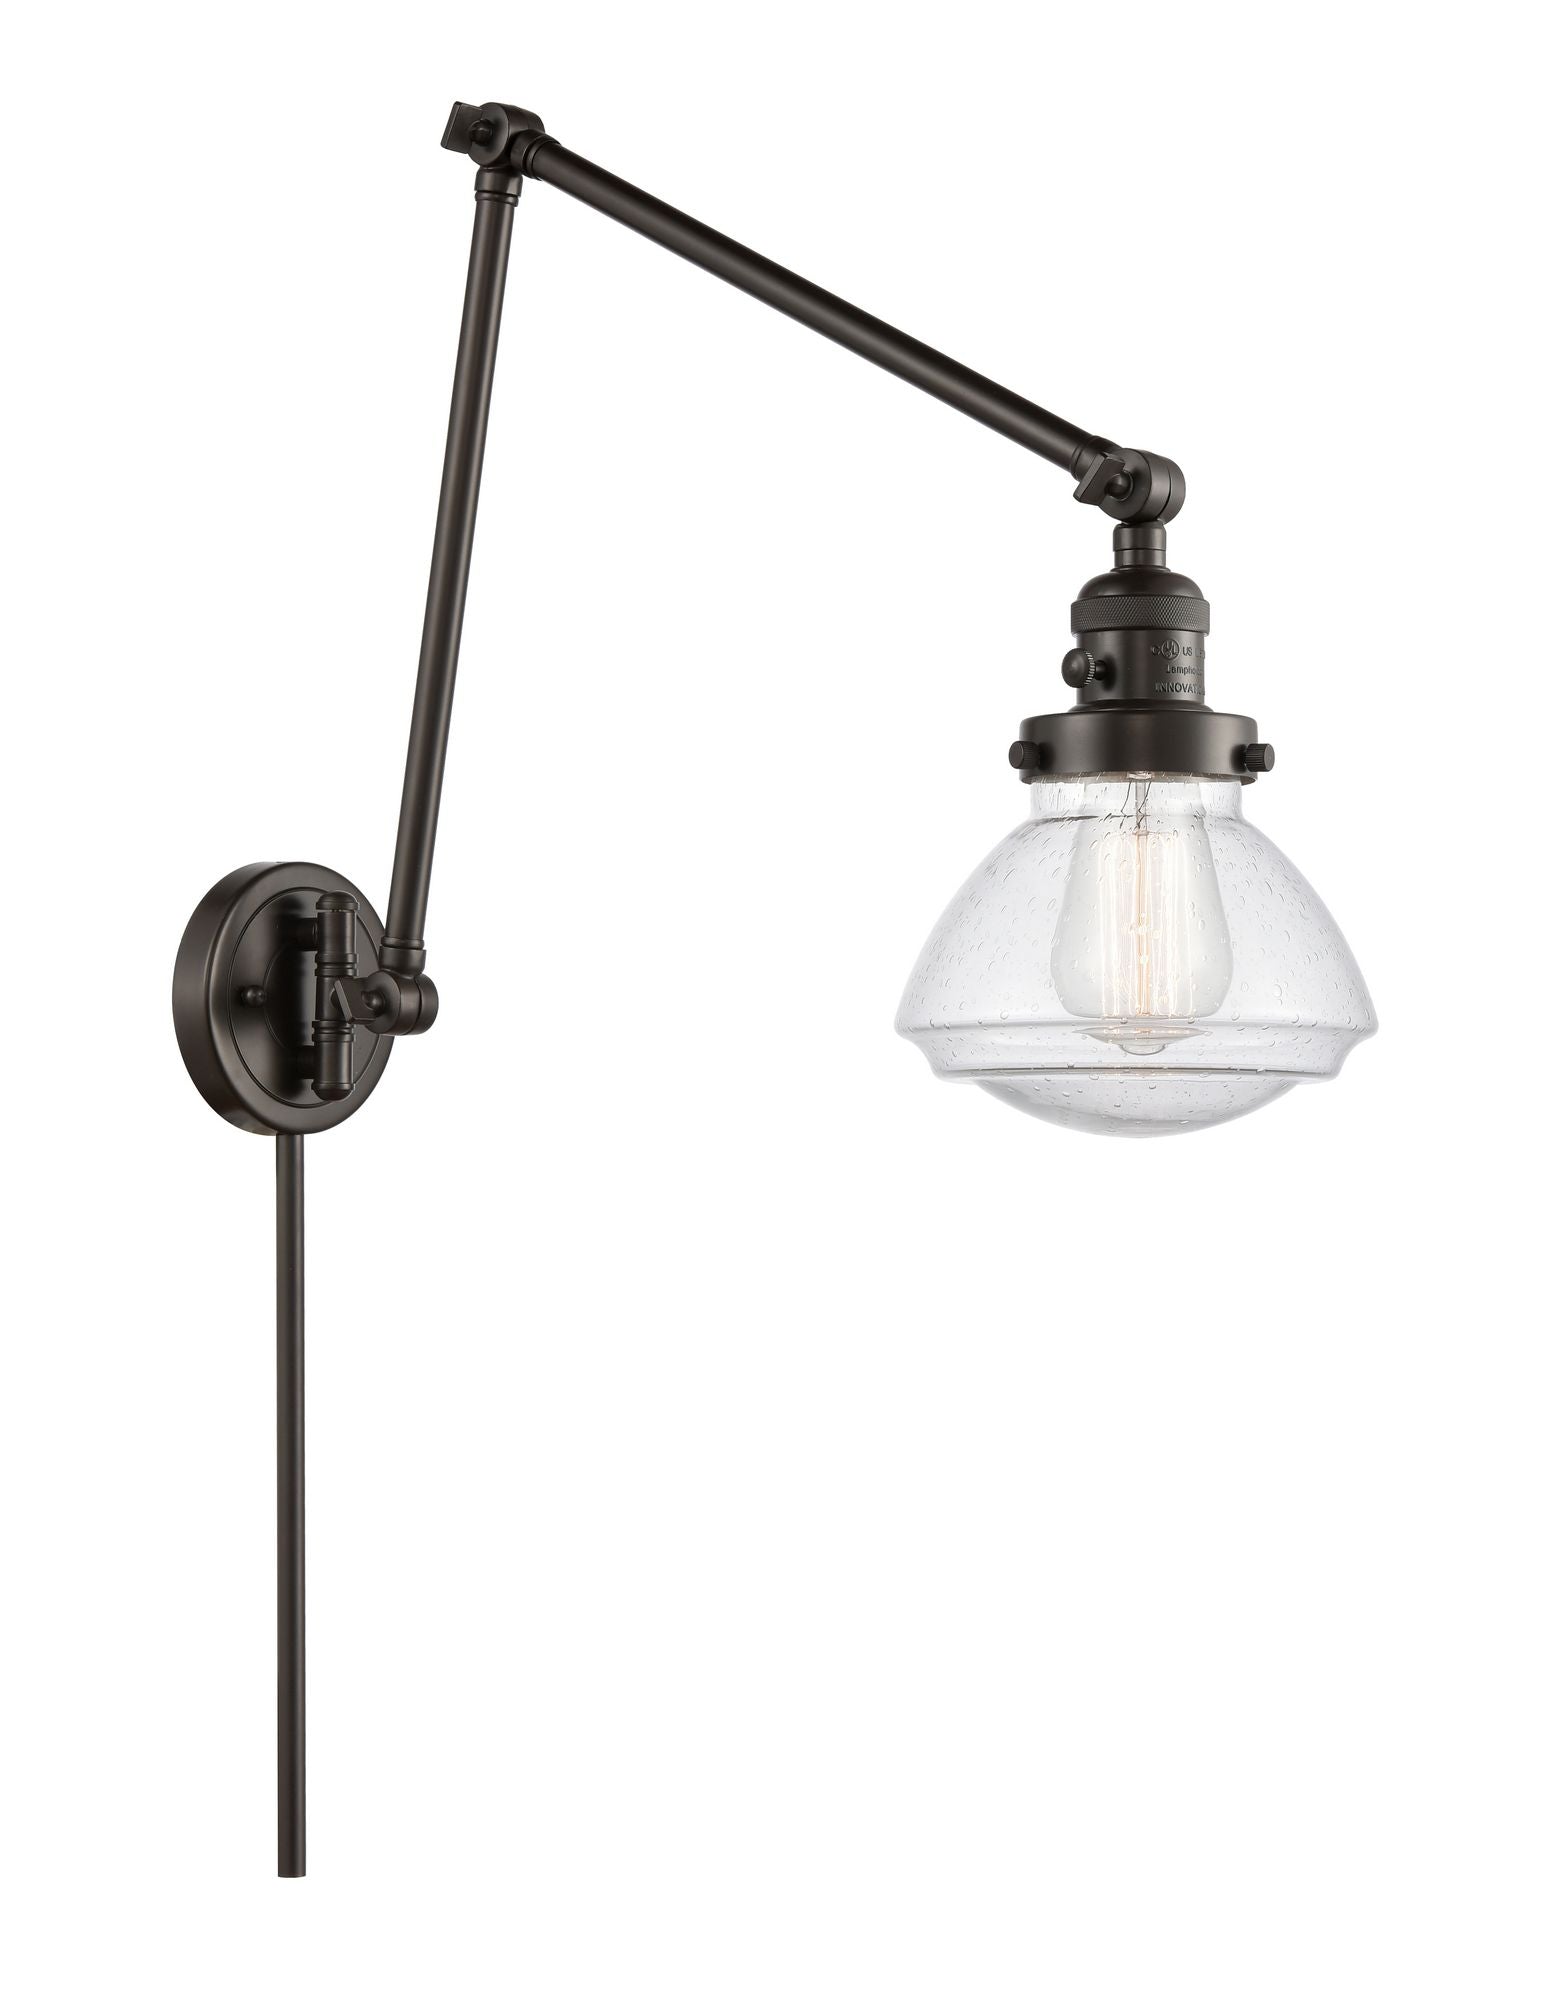 238-OB-G324 1-Light 8.75" Oil Rubbed Bronze Swing Arm - Seedy Olean Glass - LED Bulb - Dimmensions: 8.75 x 28.125 x 27.75 - Glass Up or Down: Yes